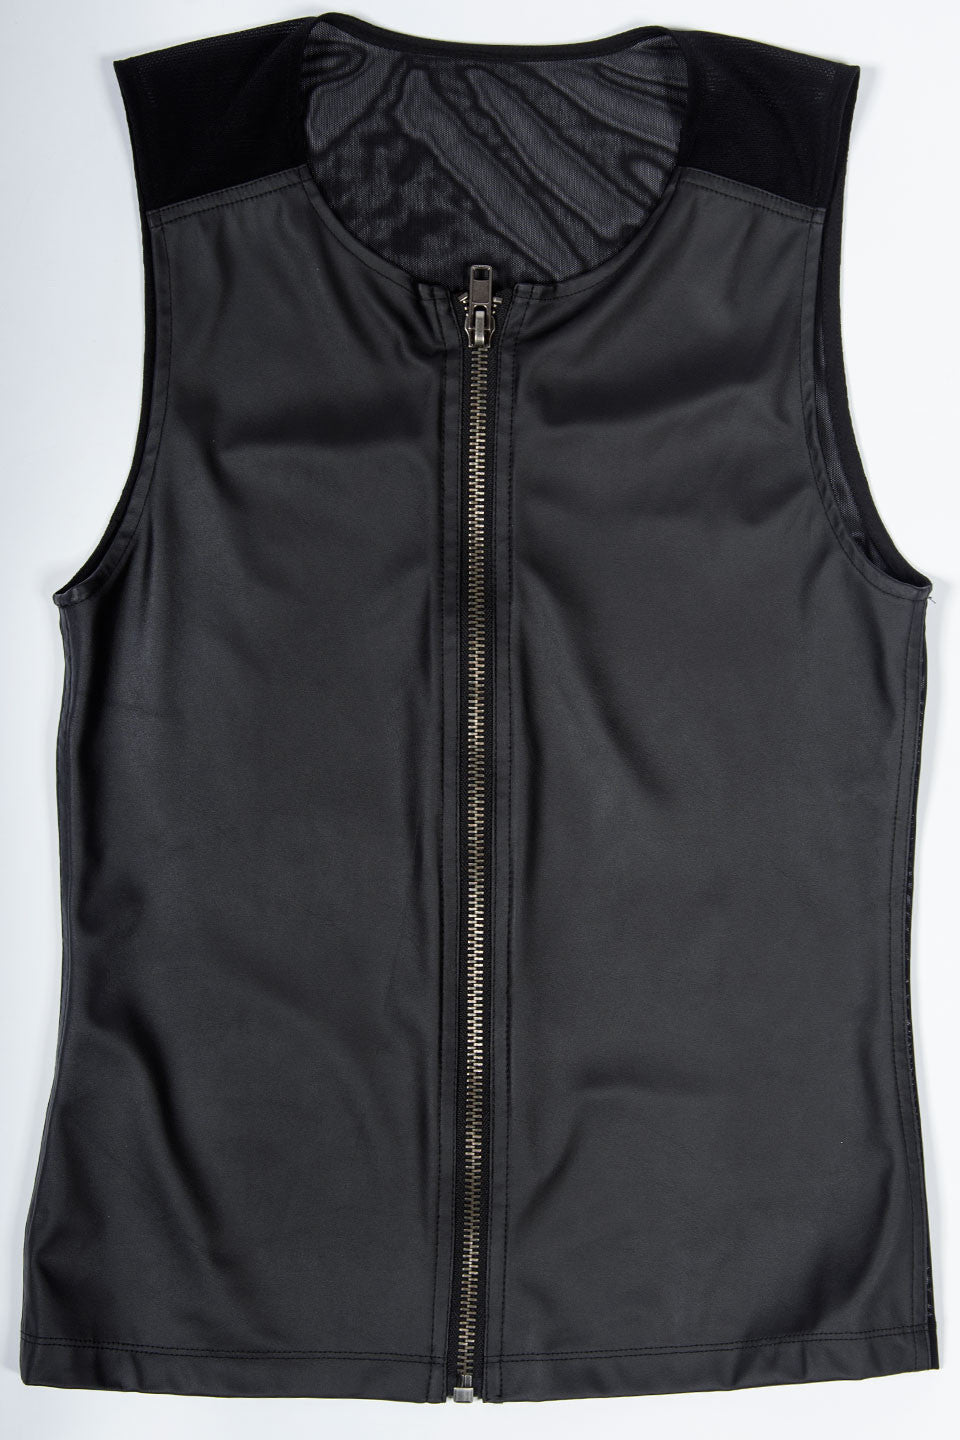 Lip Service Men's Vintage Vice Sleeveless Muscle Top in Black